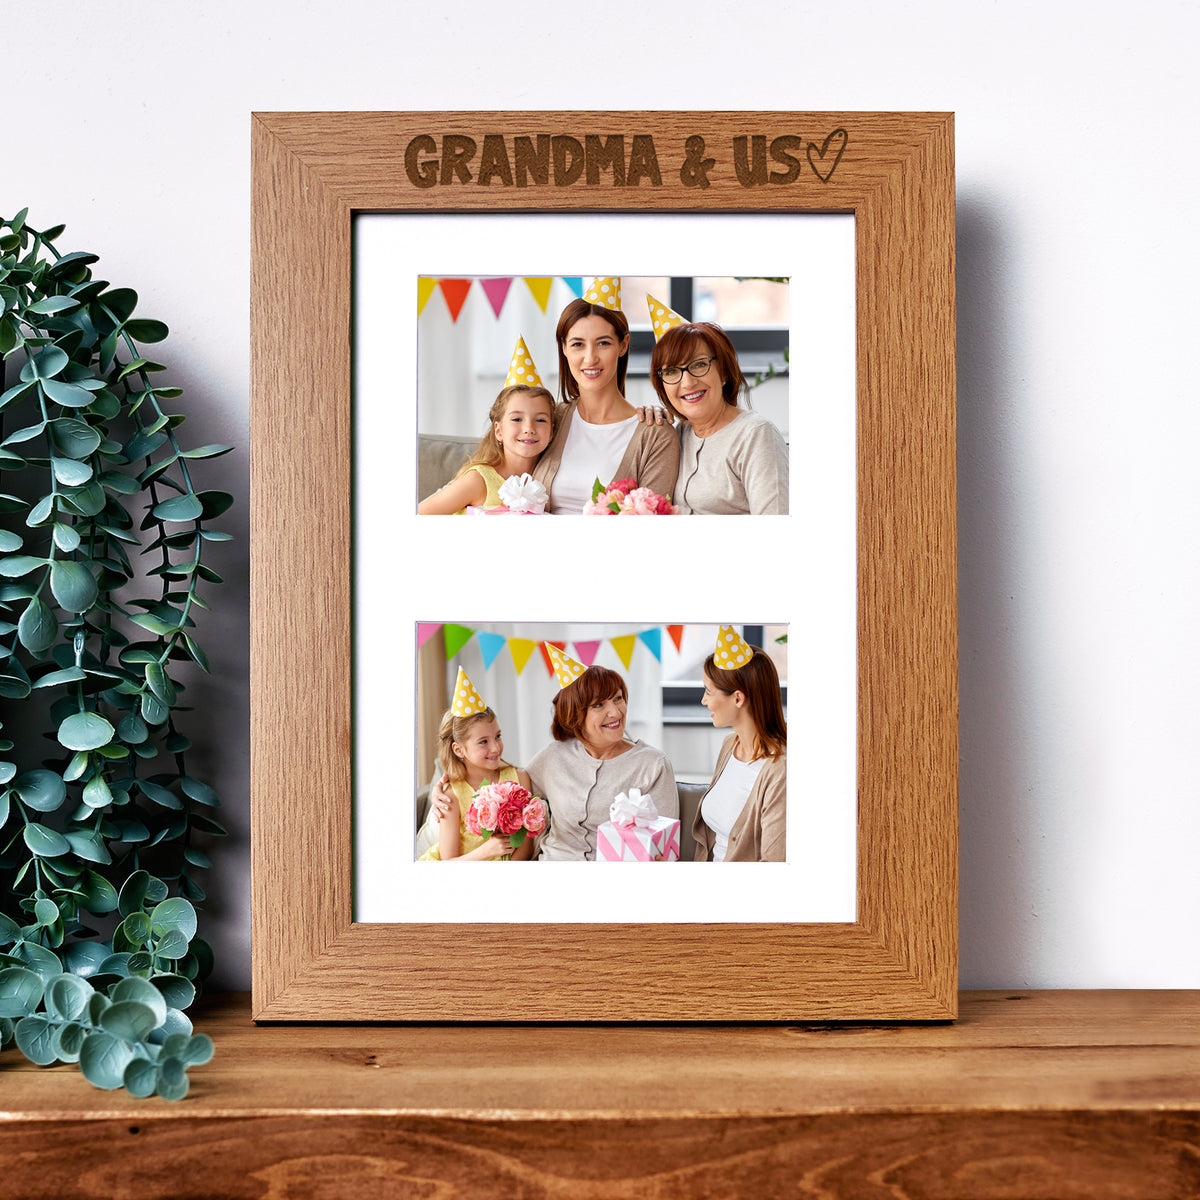 Grandma and Us Photo Picture Frame Double 6x4 Inch Landscape